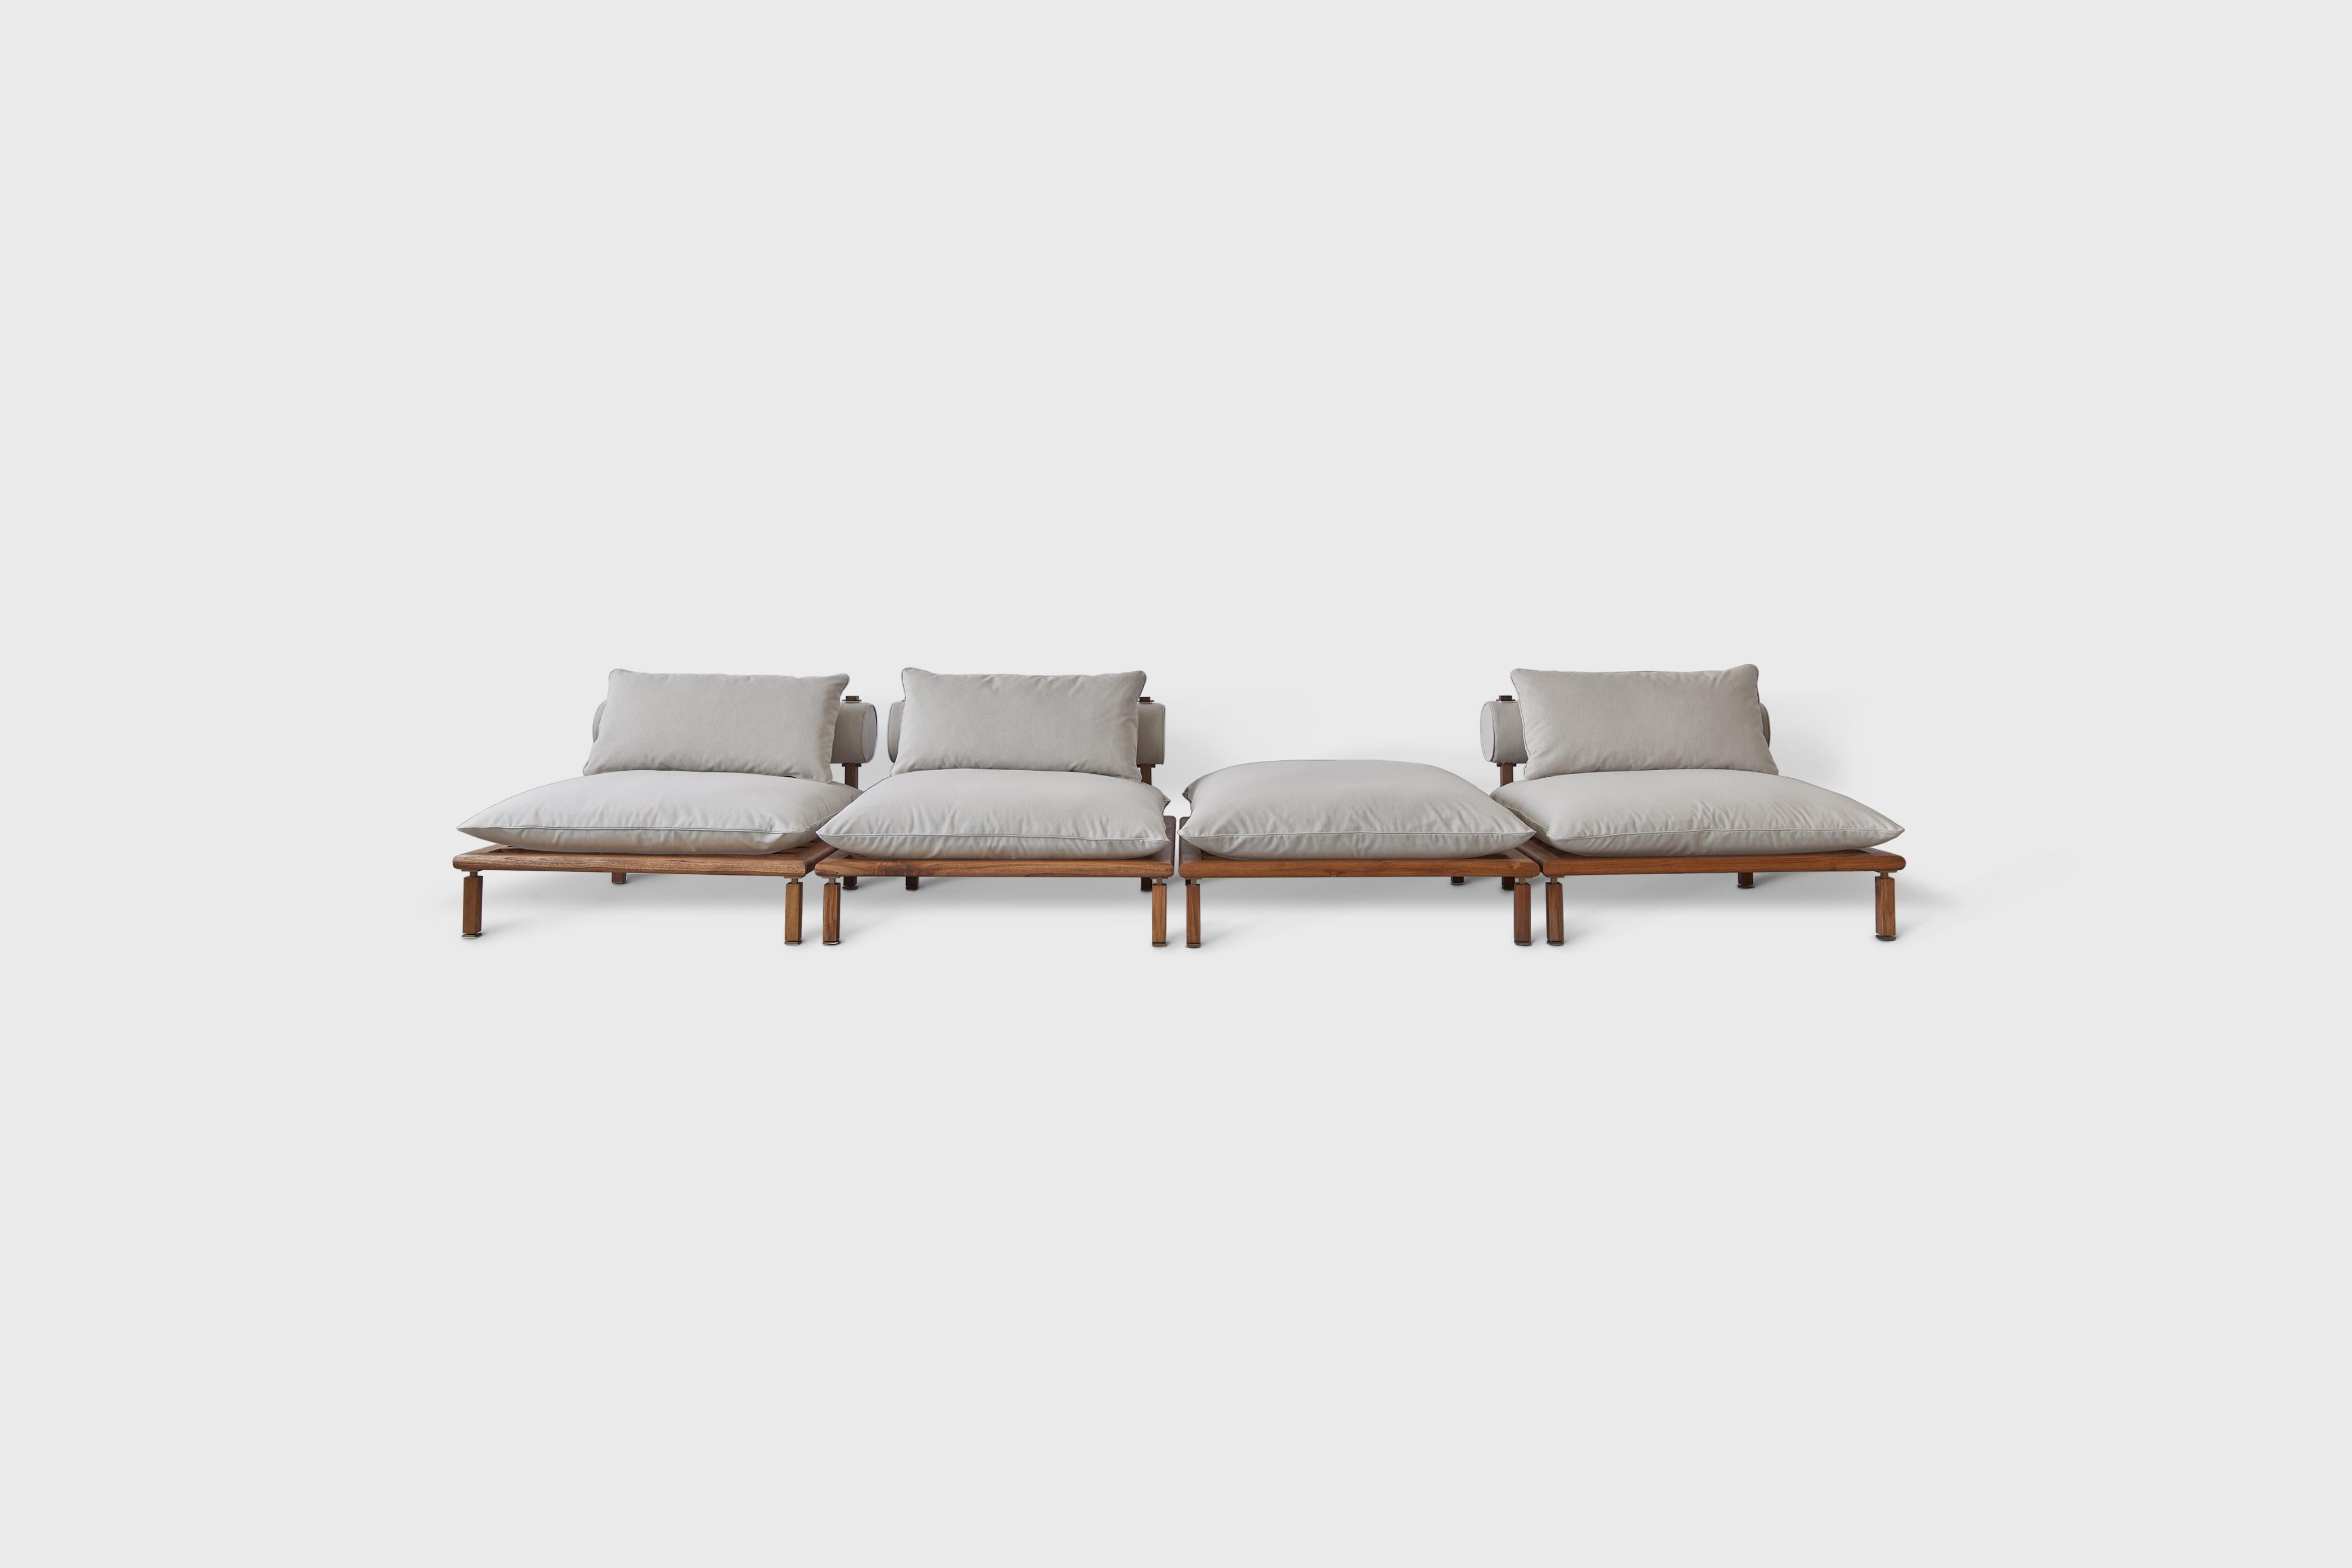 Nerthus outdoor sofa by Atra Design.
Dimensions: D 434 x W 108.5 x H 71.1 cm.
Materials: fabric, teak.
Different back and chaise module conbinations available.

3 x Back module
1 x Chaise module

Atra Design
We are Atra, a furniture brand produced